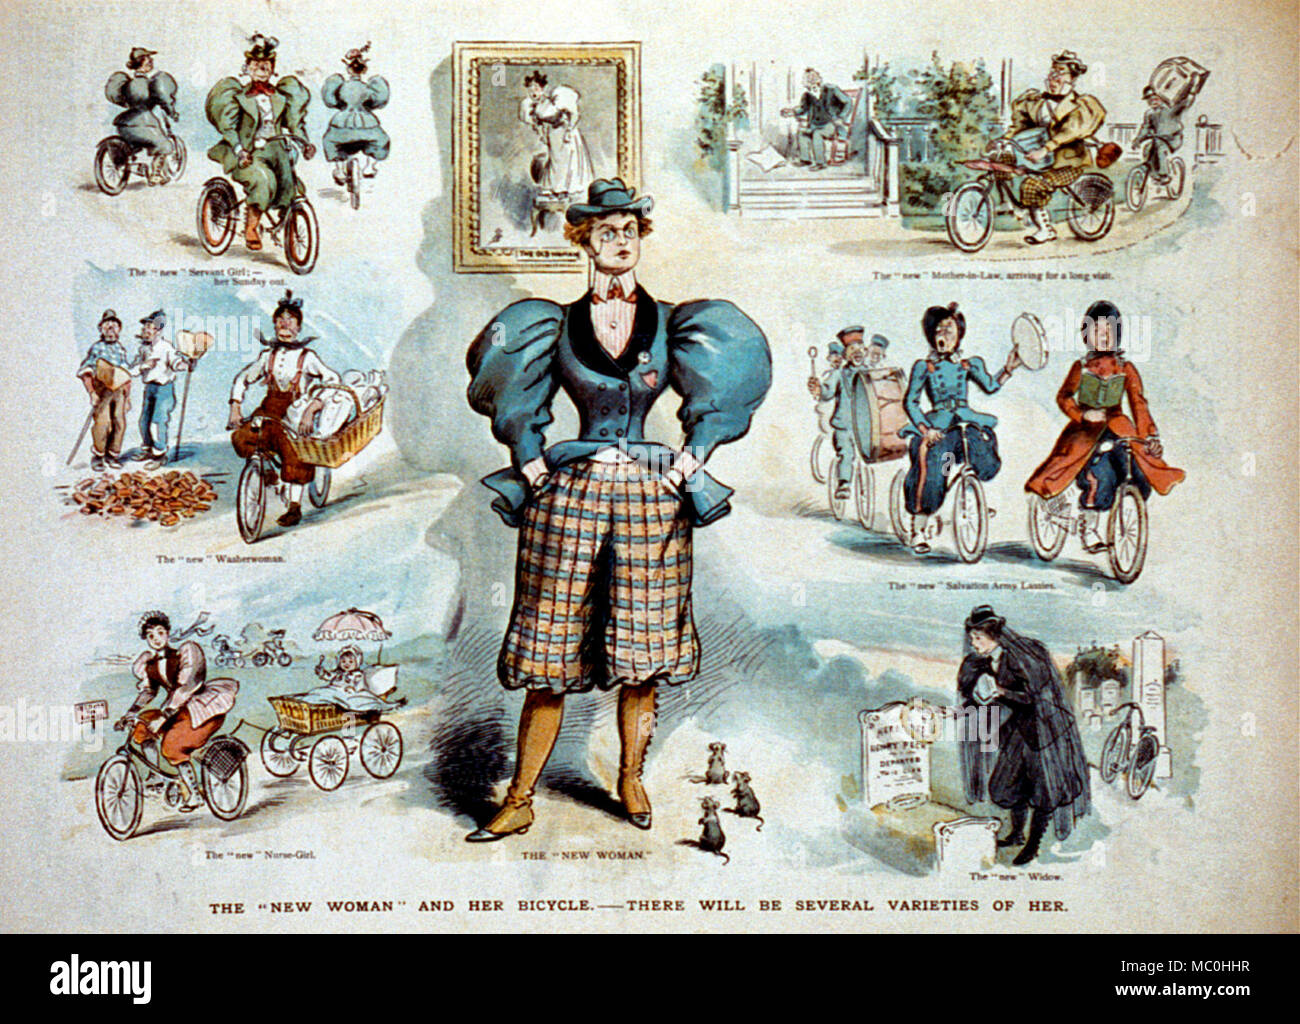 The 'new woman' and her bicycle - there will be several varieties of her. Print shows a vignette cartoon with 'The 'new woman'' standing at center, wearing pantaloons with her hands in her pockets and looking defiant, with three mice at her feet, and a painting in the background that shows 'The Old Woman' standing on a chair at the sight of a mouse. The surrounding vignettes show women riding bicycles as 'Salvation Army Lassies', a 'Mother-in-Law, arriving for a long visit' with a man on a bicycle carrying her luggage, a 'Servant Girl - Her Sunday Out', a 'Washerwoman' with a basket of clothin Stock Photo